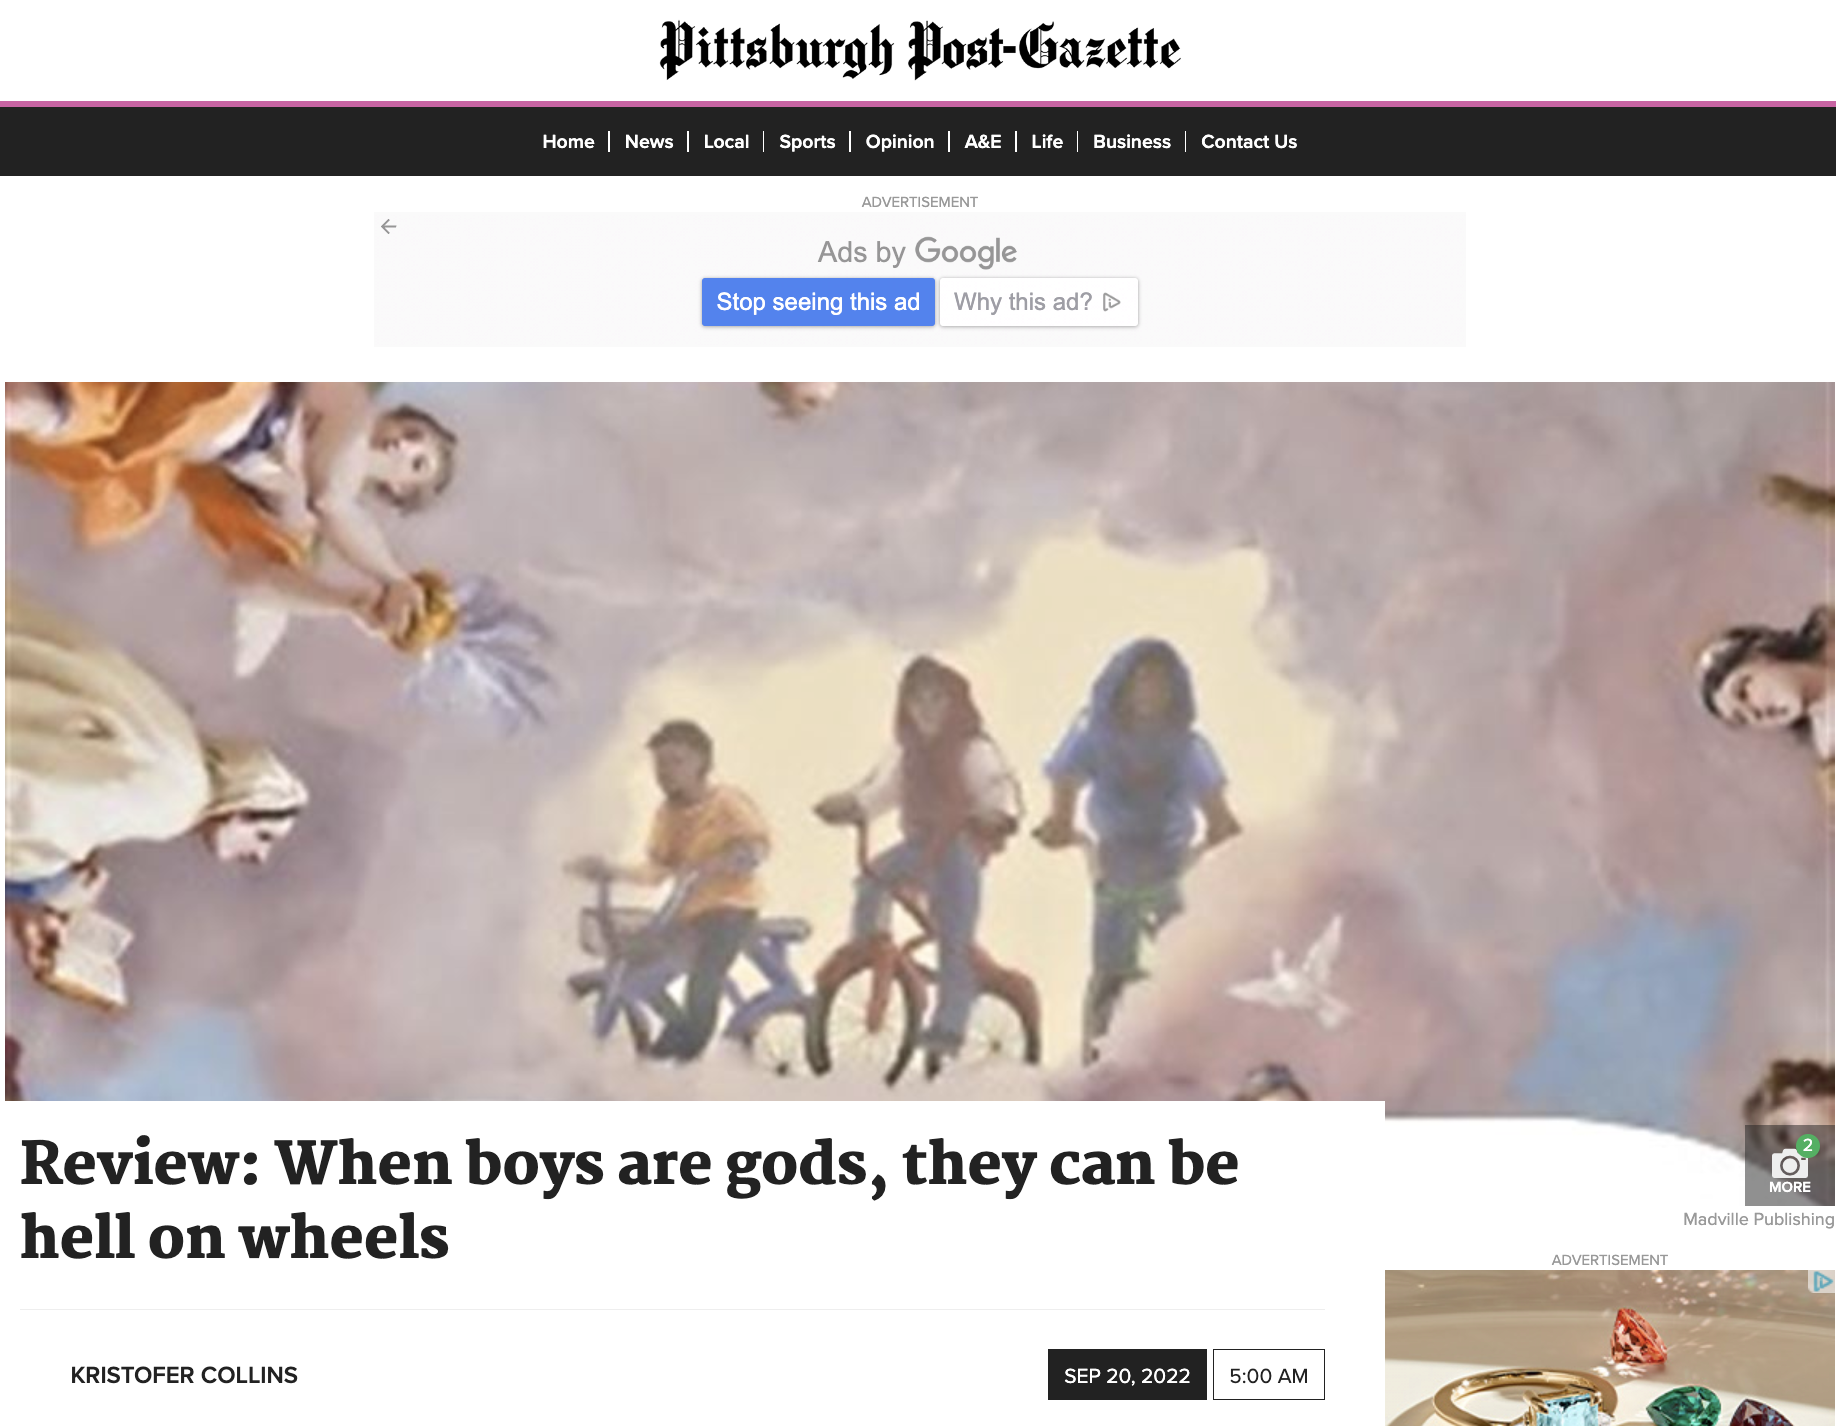 Review: When boys are gods, they can be hell on wheels - interview with author Michael Simms